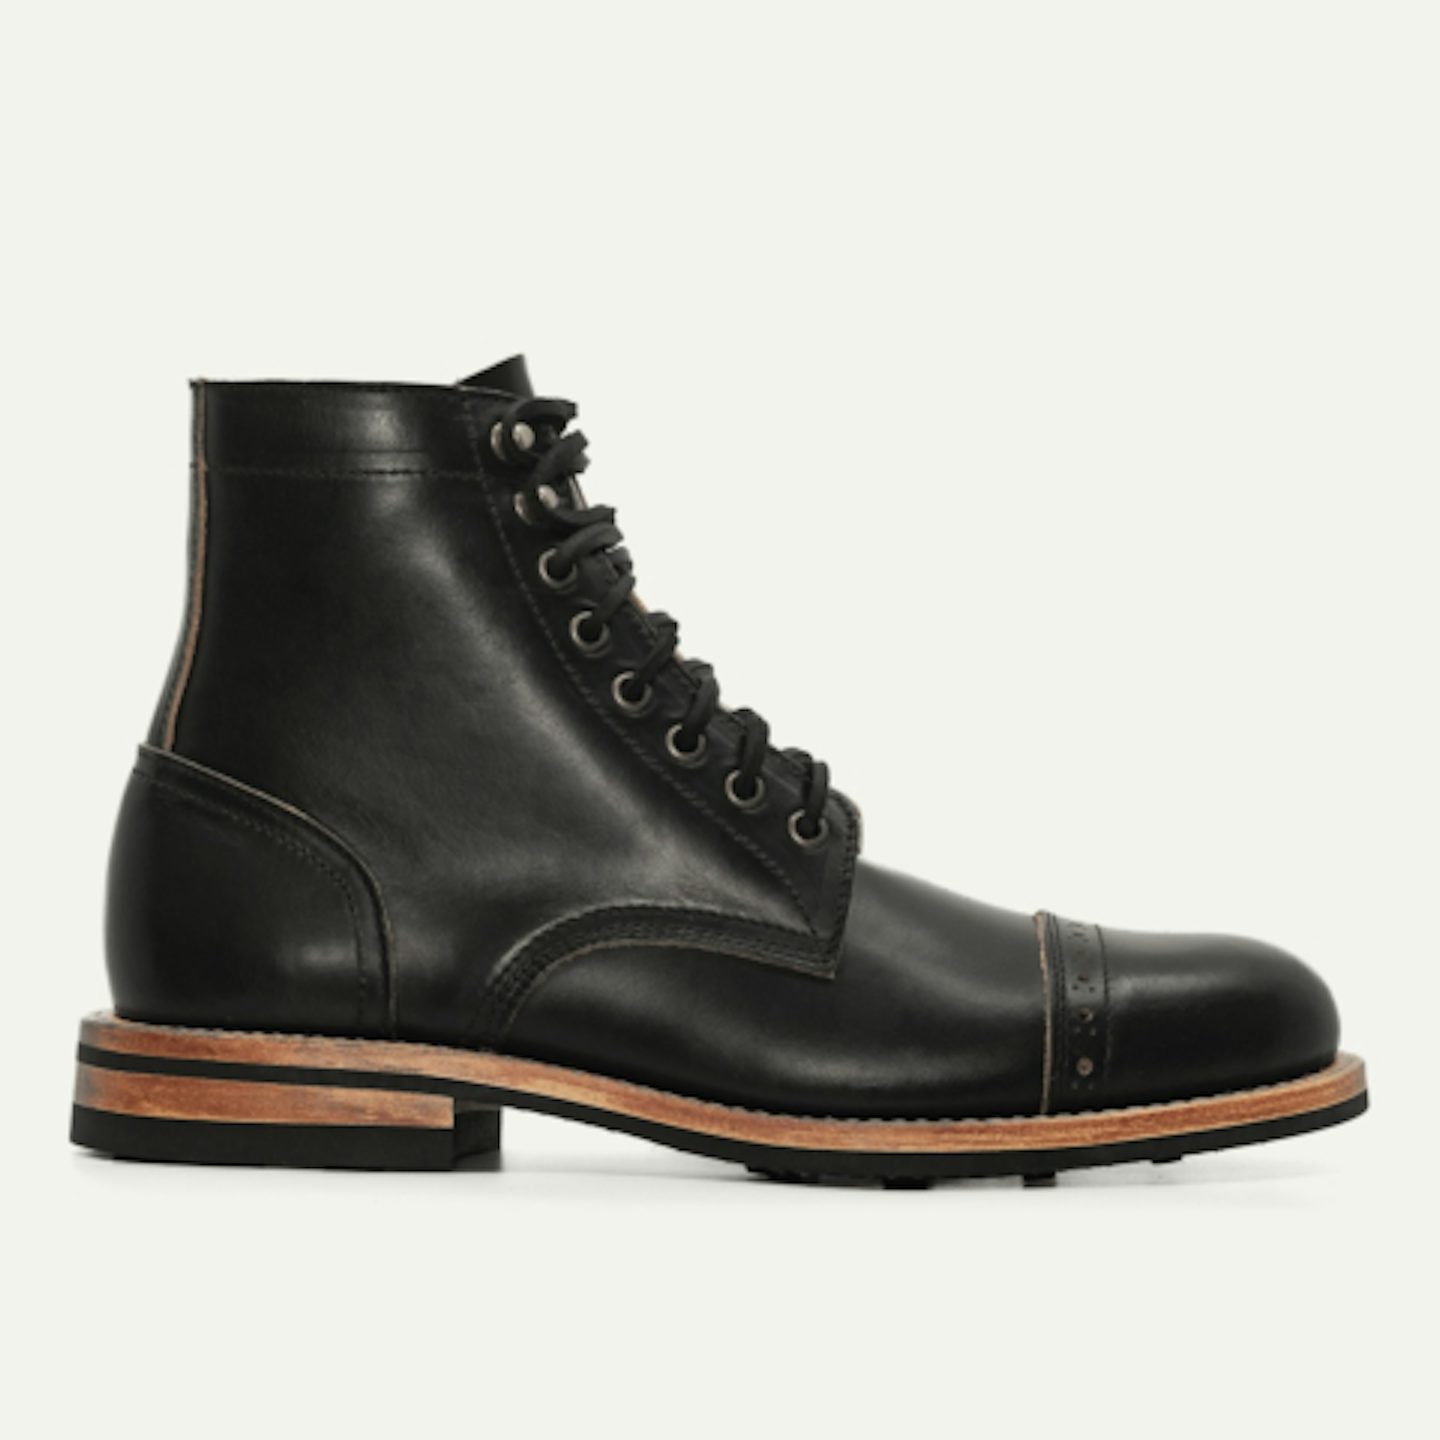 Cap-Toe Trench Boot - Natural Chromexcel